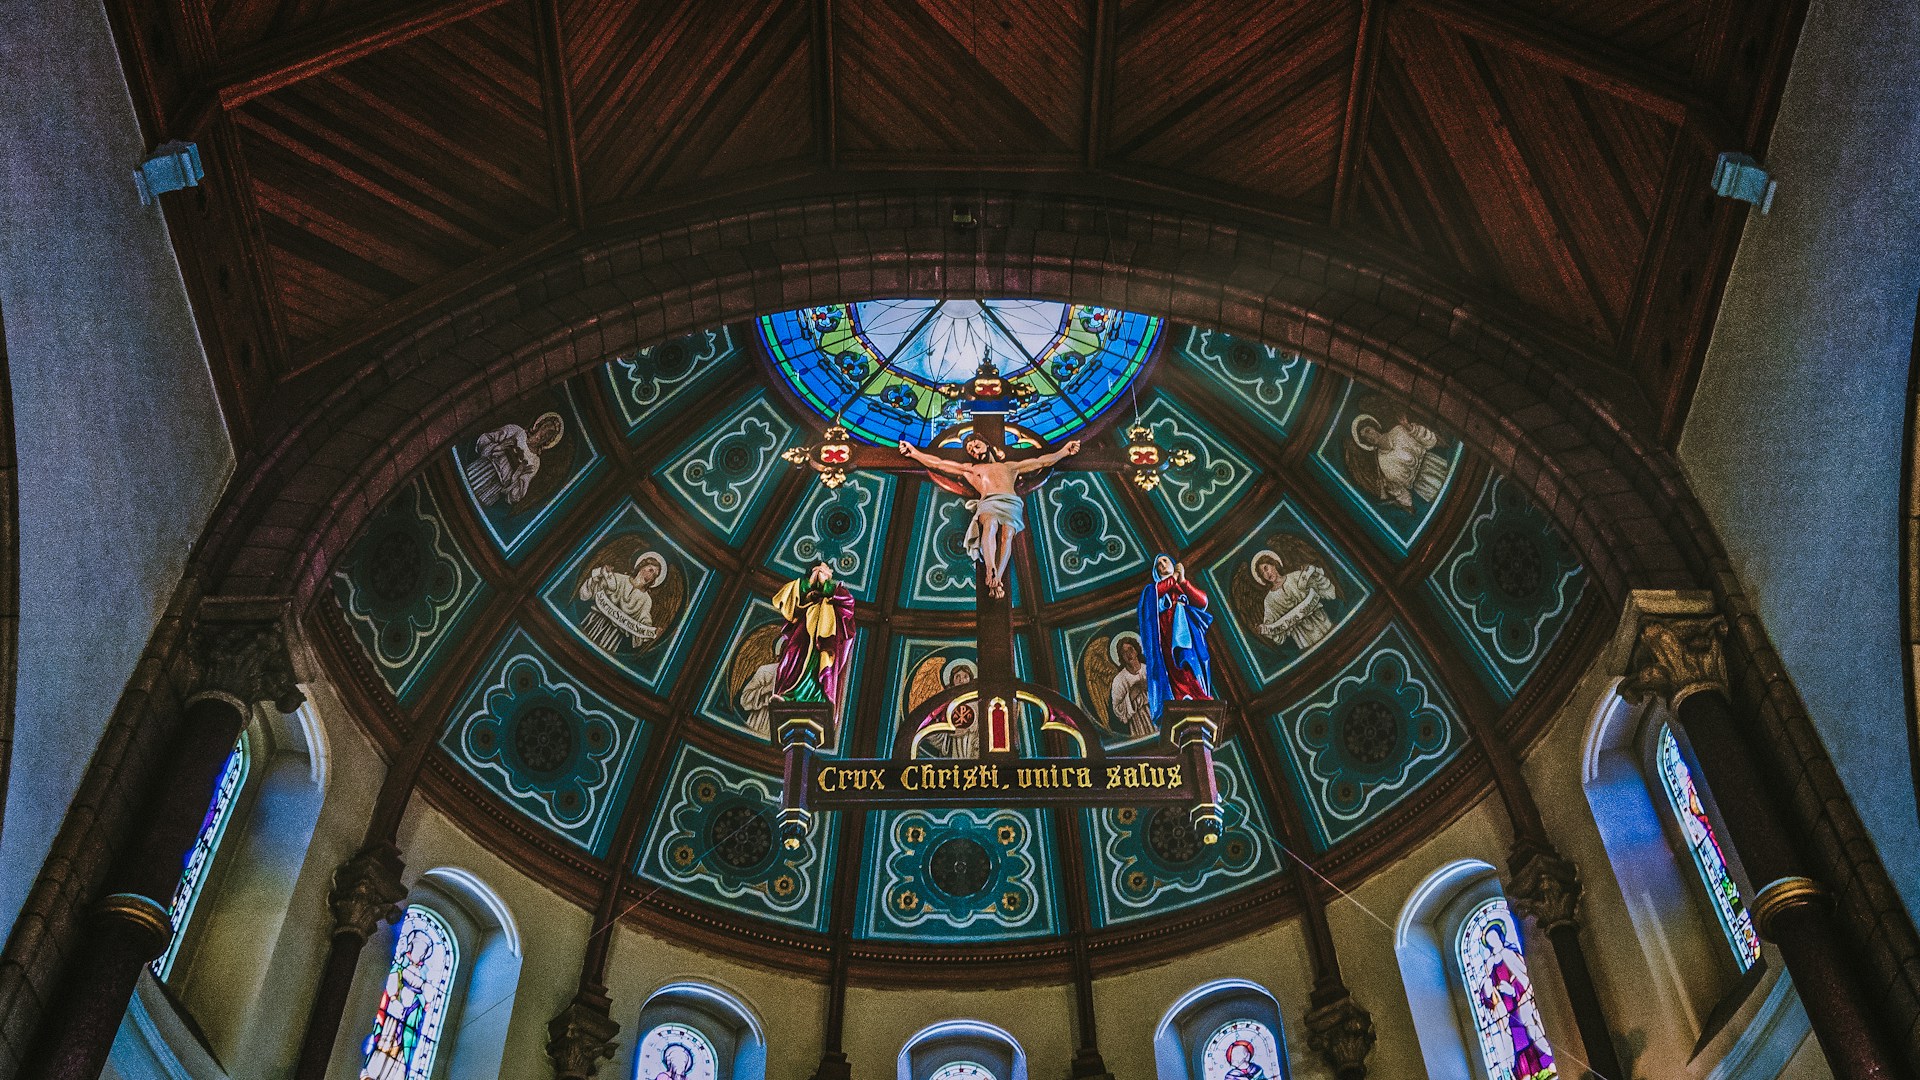 Crucifix and dome above the altar.